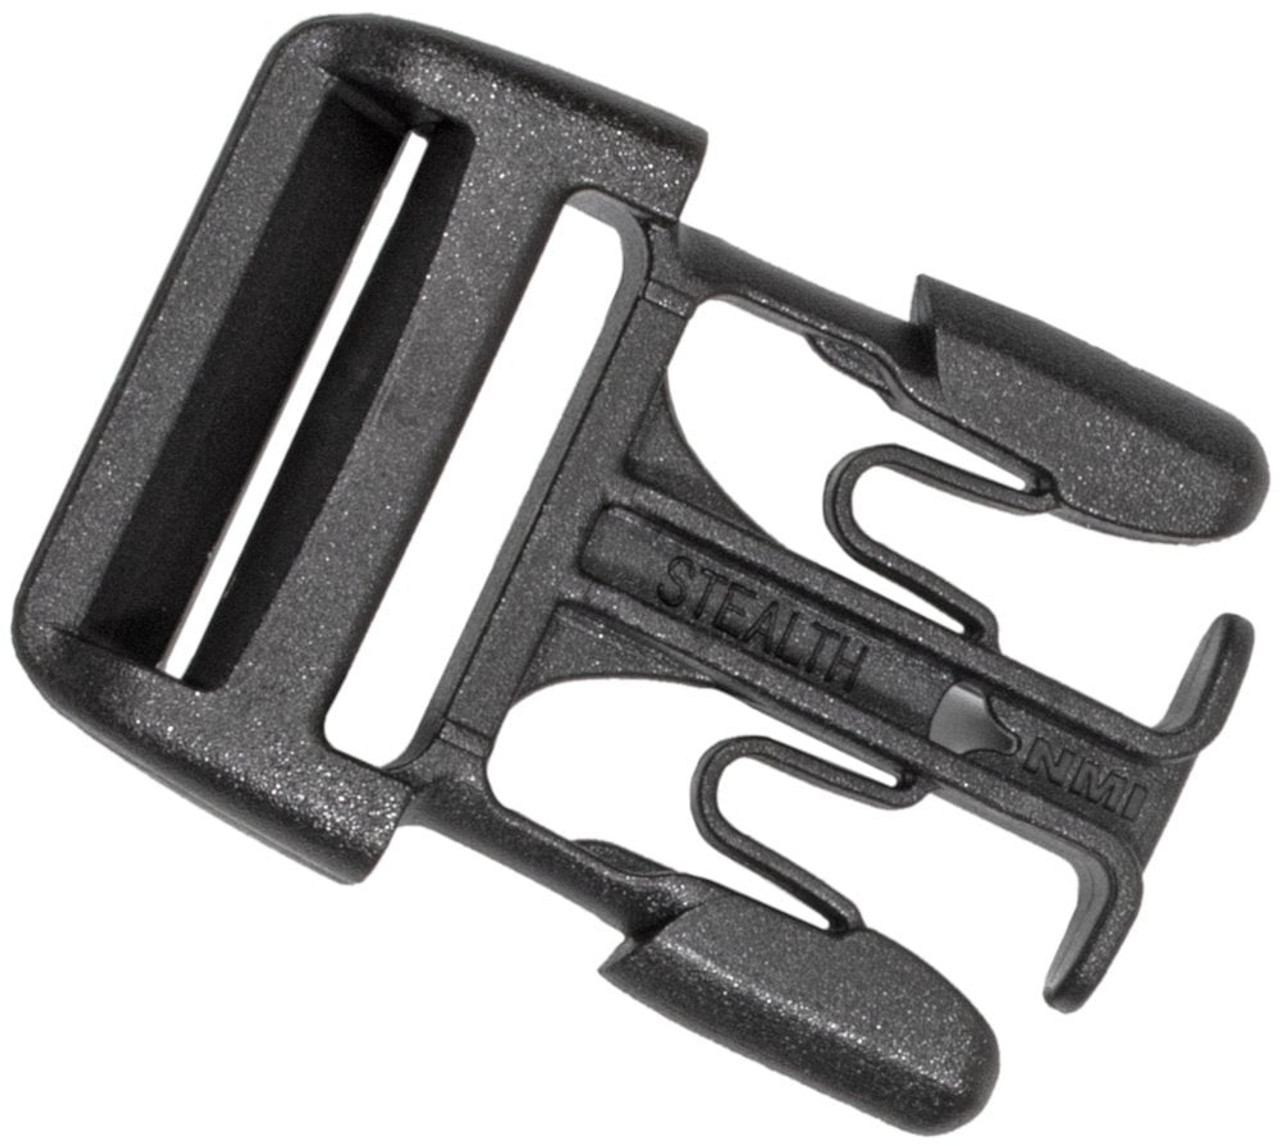 E178 Ortlieb Side-release buckle Stealth, 25mm, with strap – Ortlieb Canada